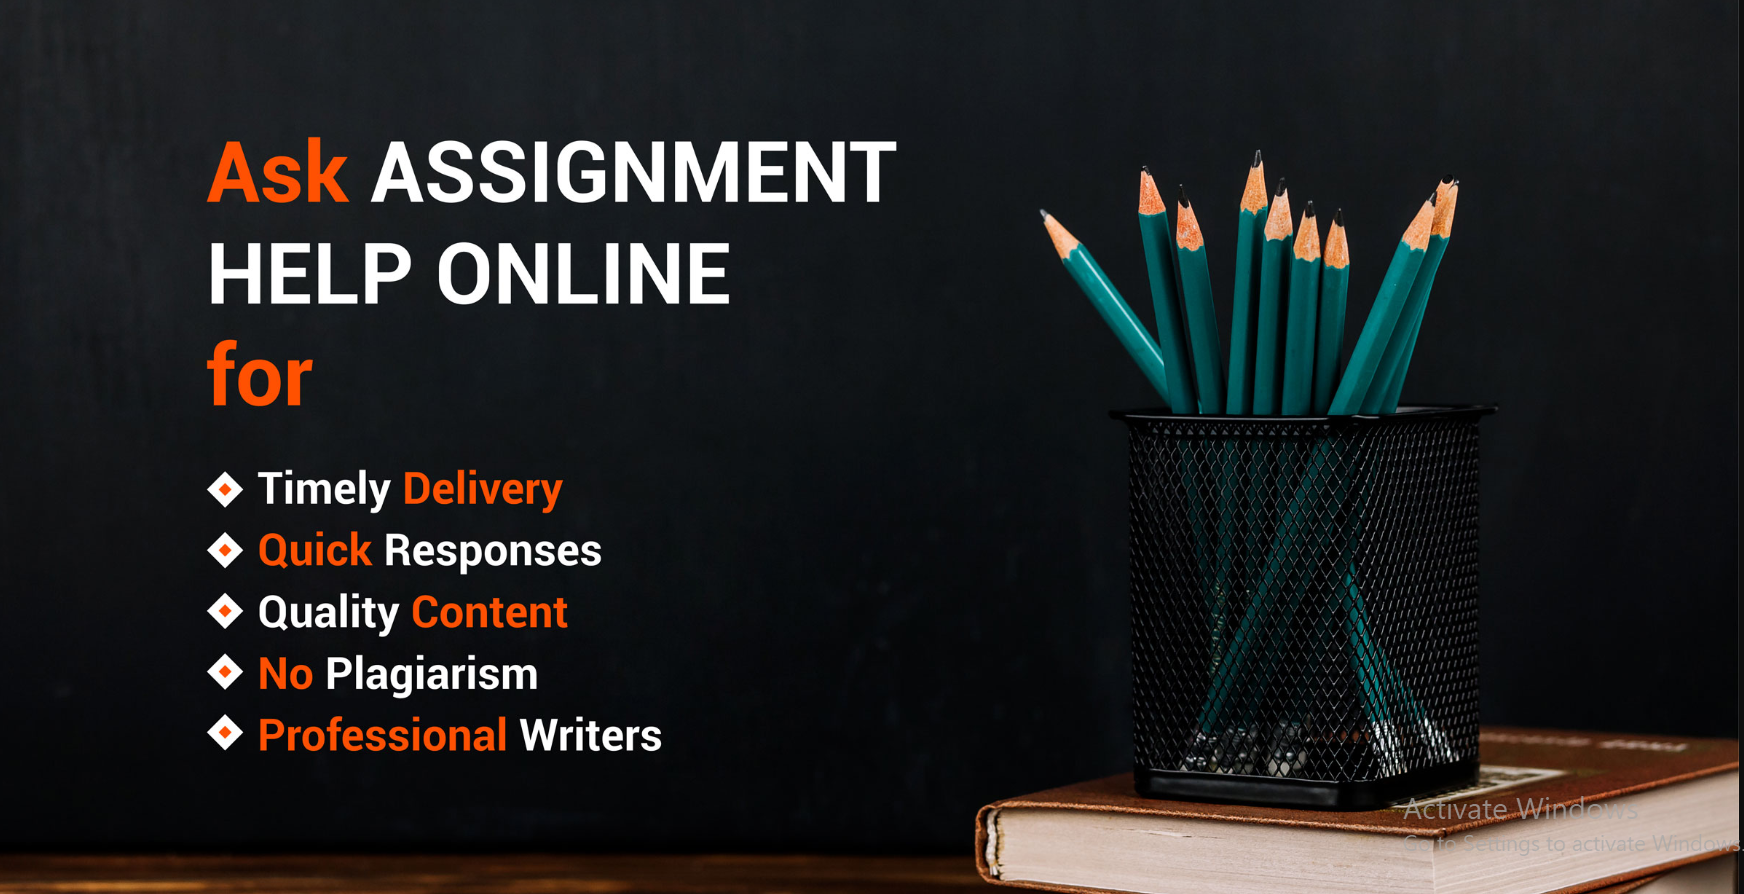 Online Writing Help With Assignments